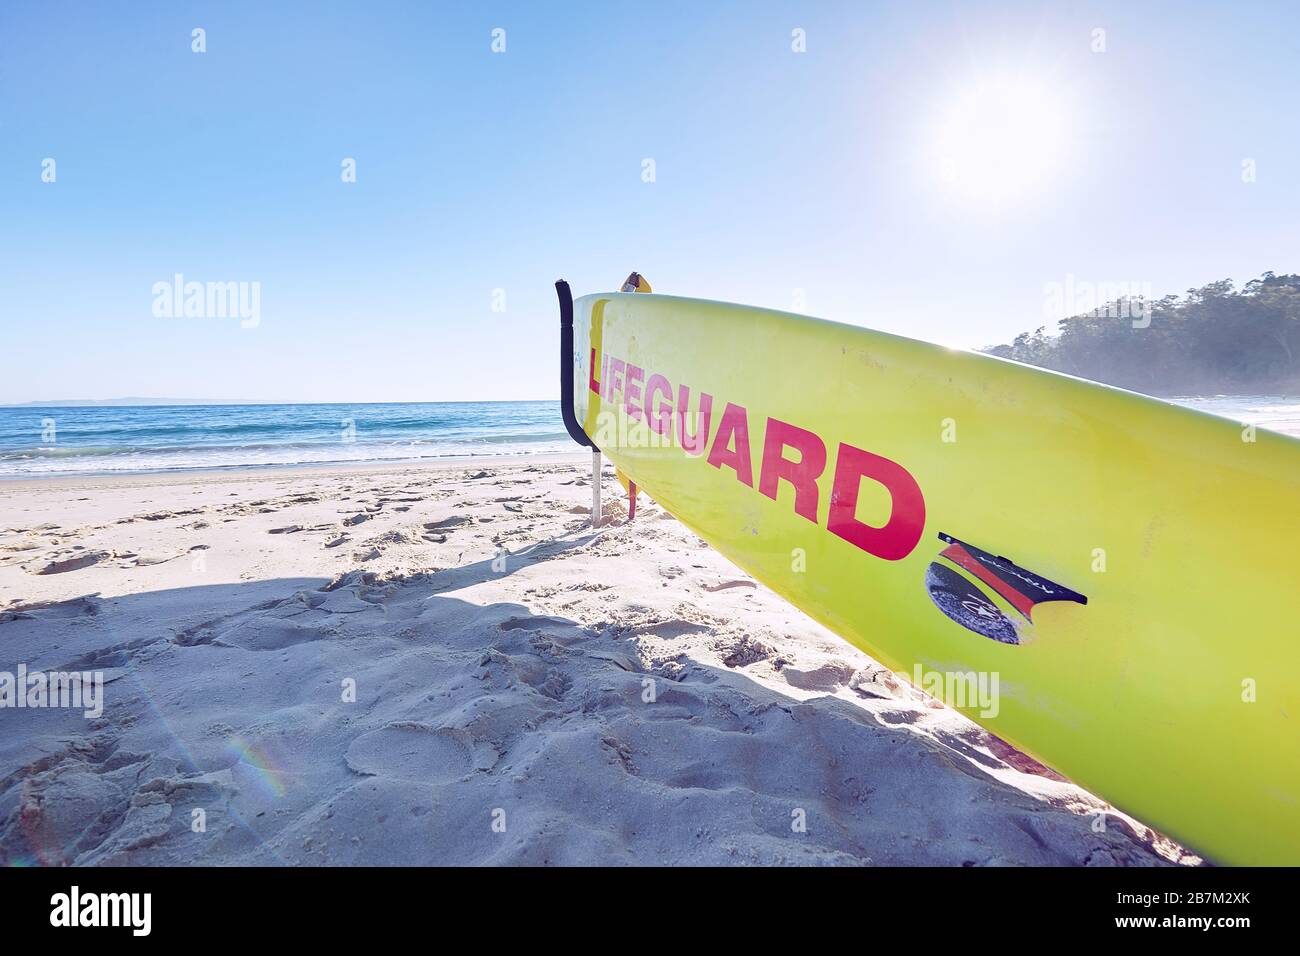 Lifeguard equipment in early morning light on a deserted Main Beach at Noosa, Queensland, Australia Stock Photo